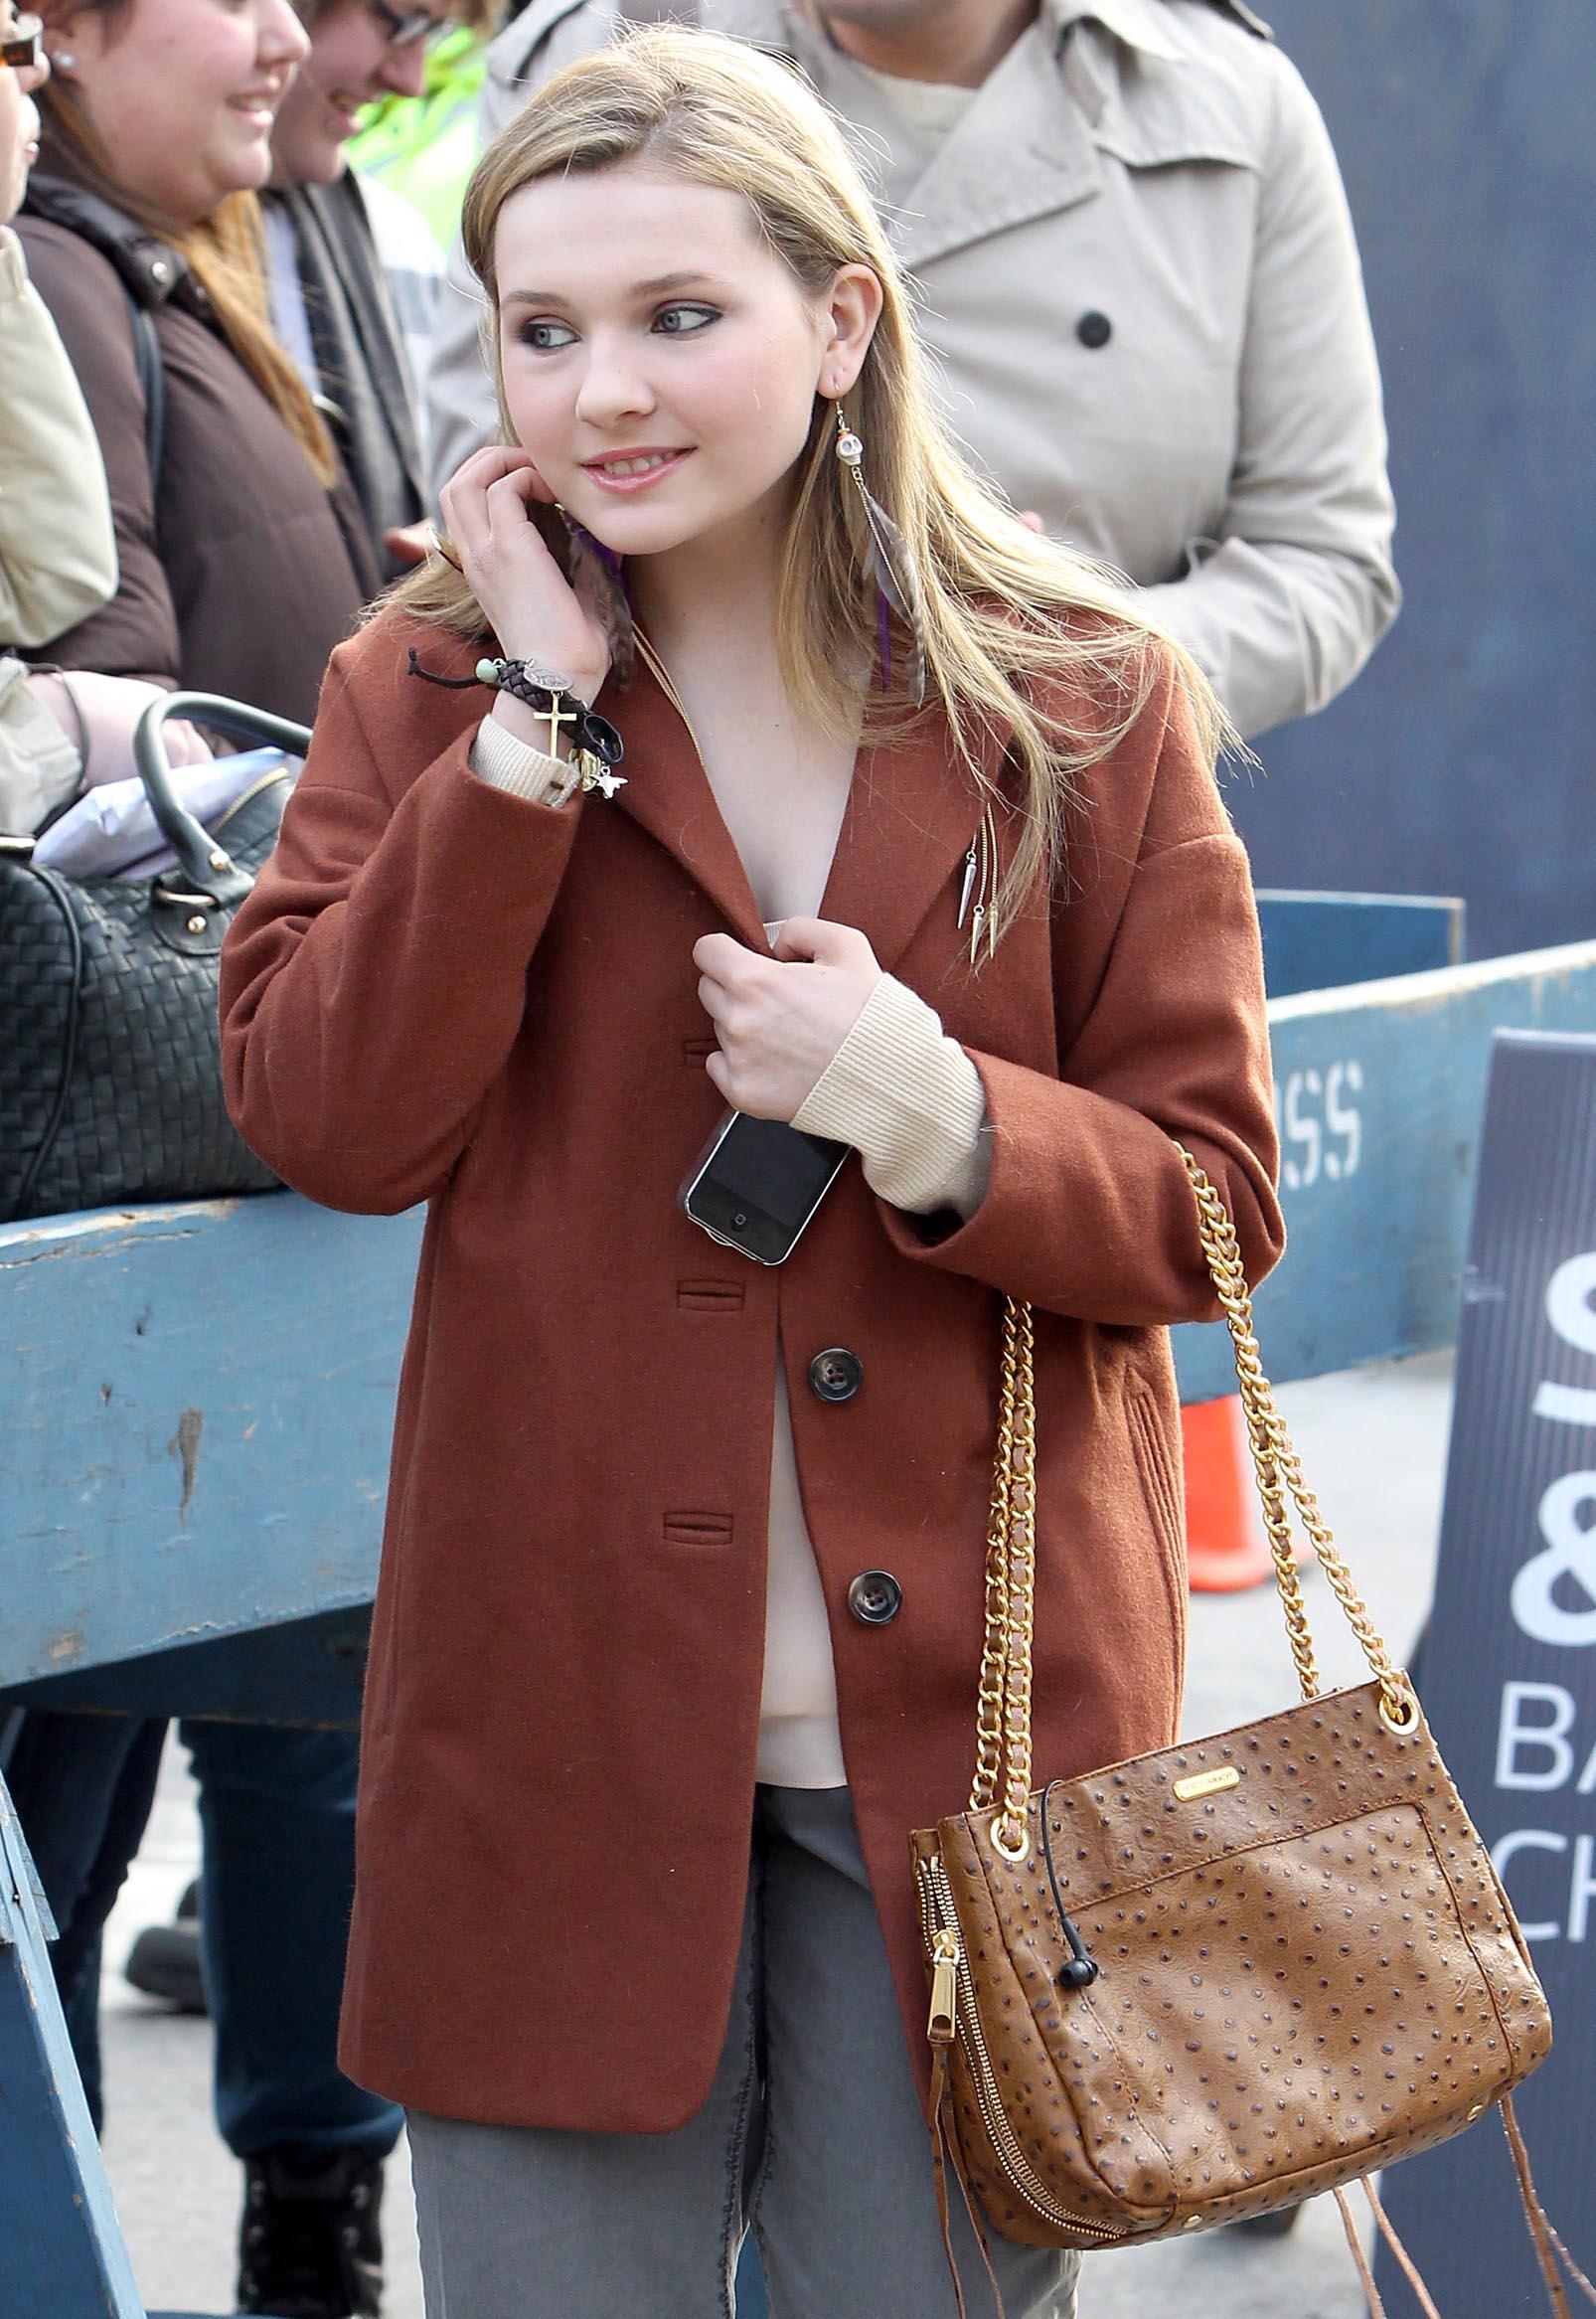 Abigail Breslin Supports Britney Spears